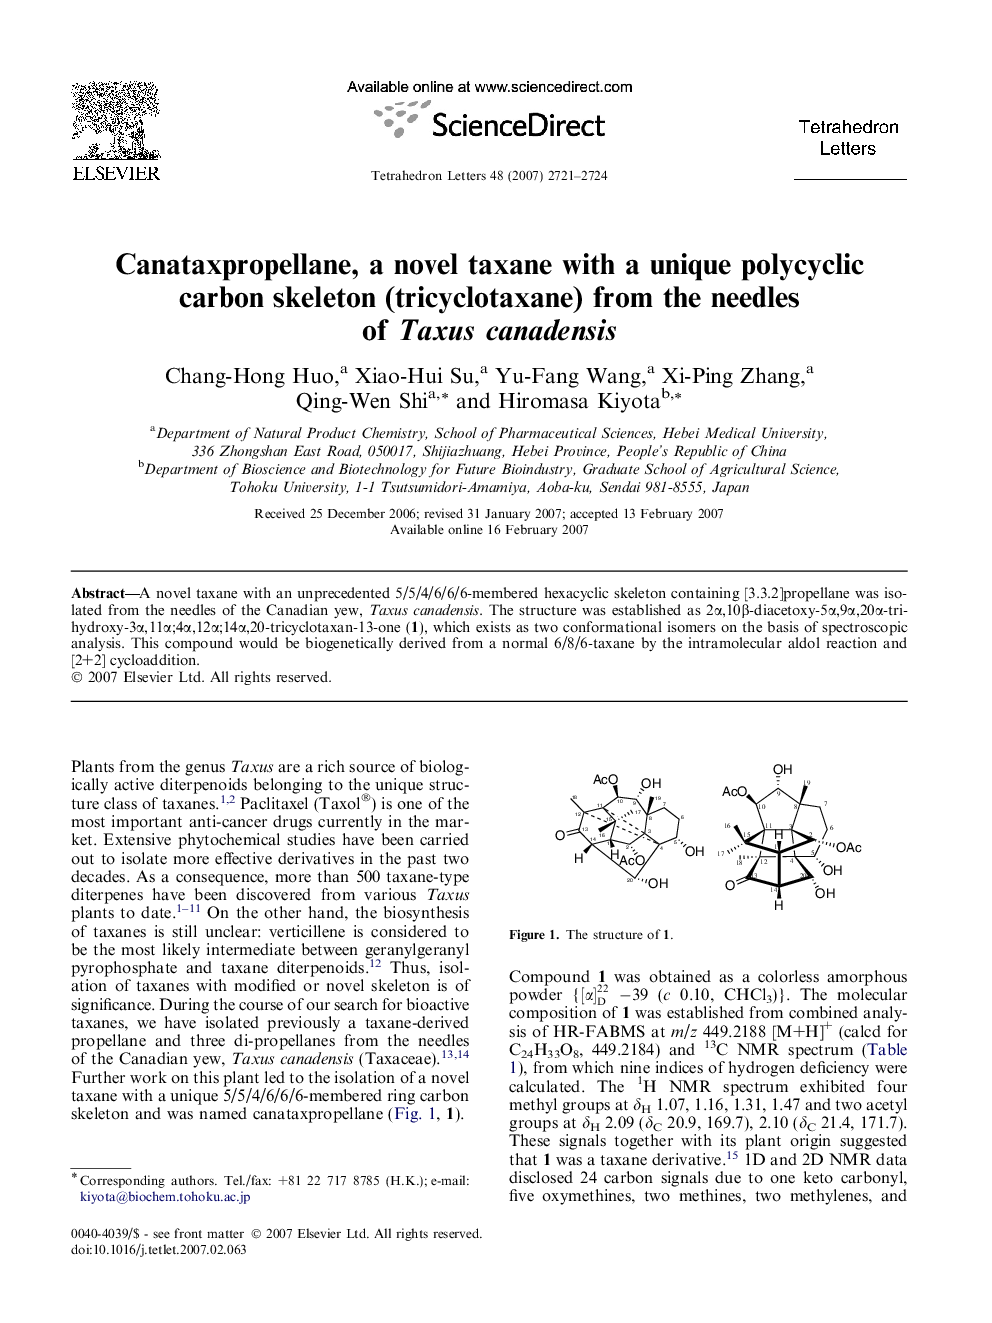 Canataxpropellane, a novel taxane with a unique polycyclic carbon skeleton (tricyclotaxane) from the needles of Taxus canadensis